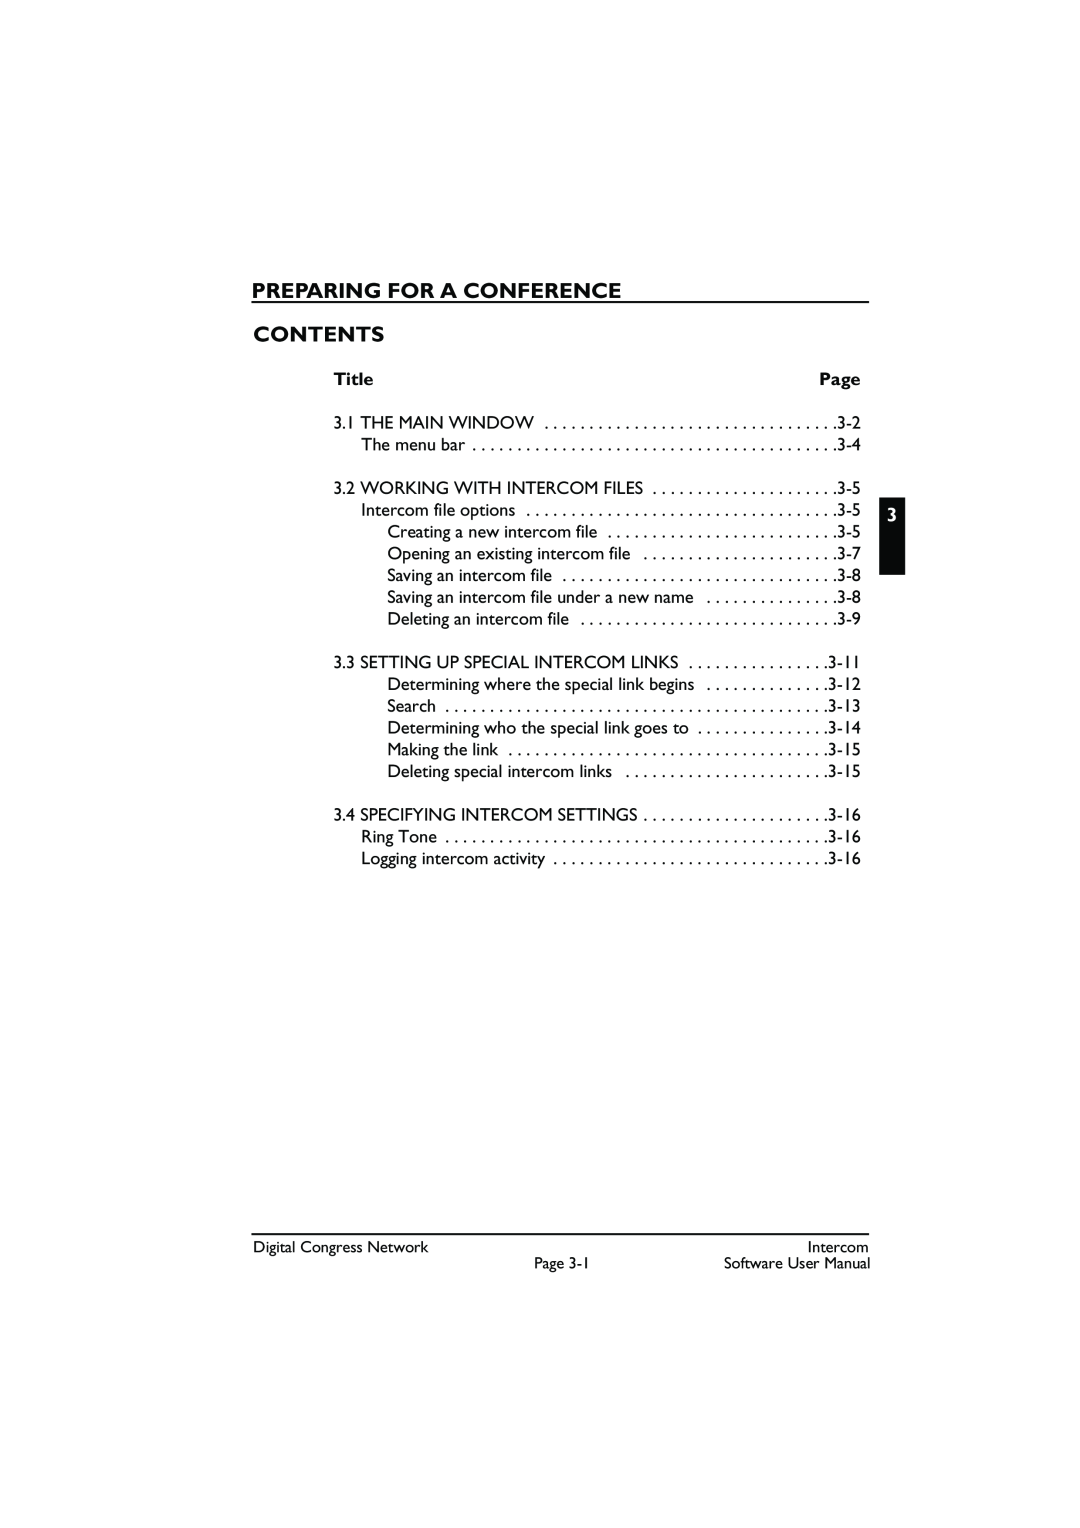 Bosch Appliances LBB 3573 user manual Preparing For A Conference Contents, Title, Page 